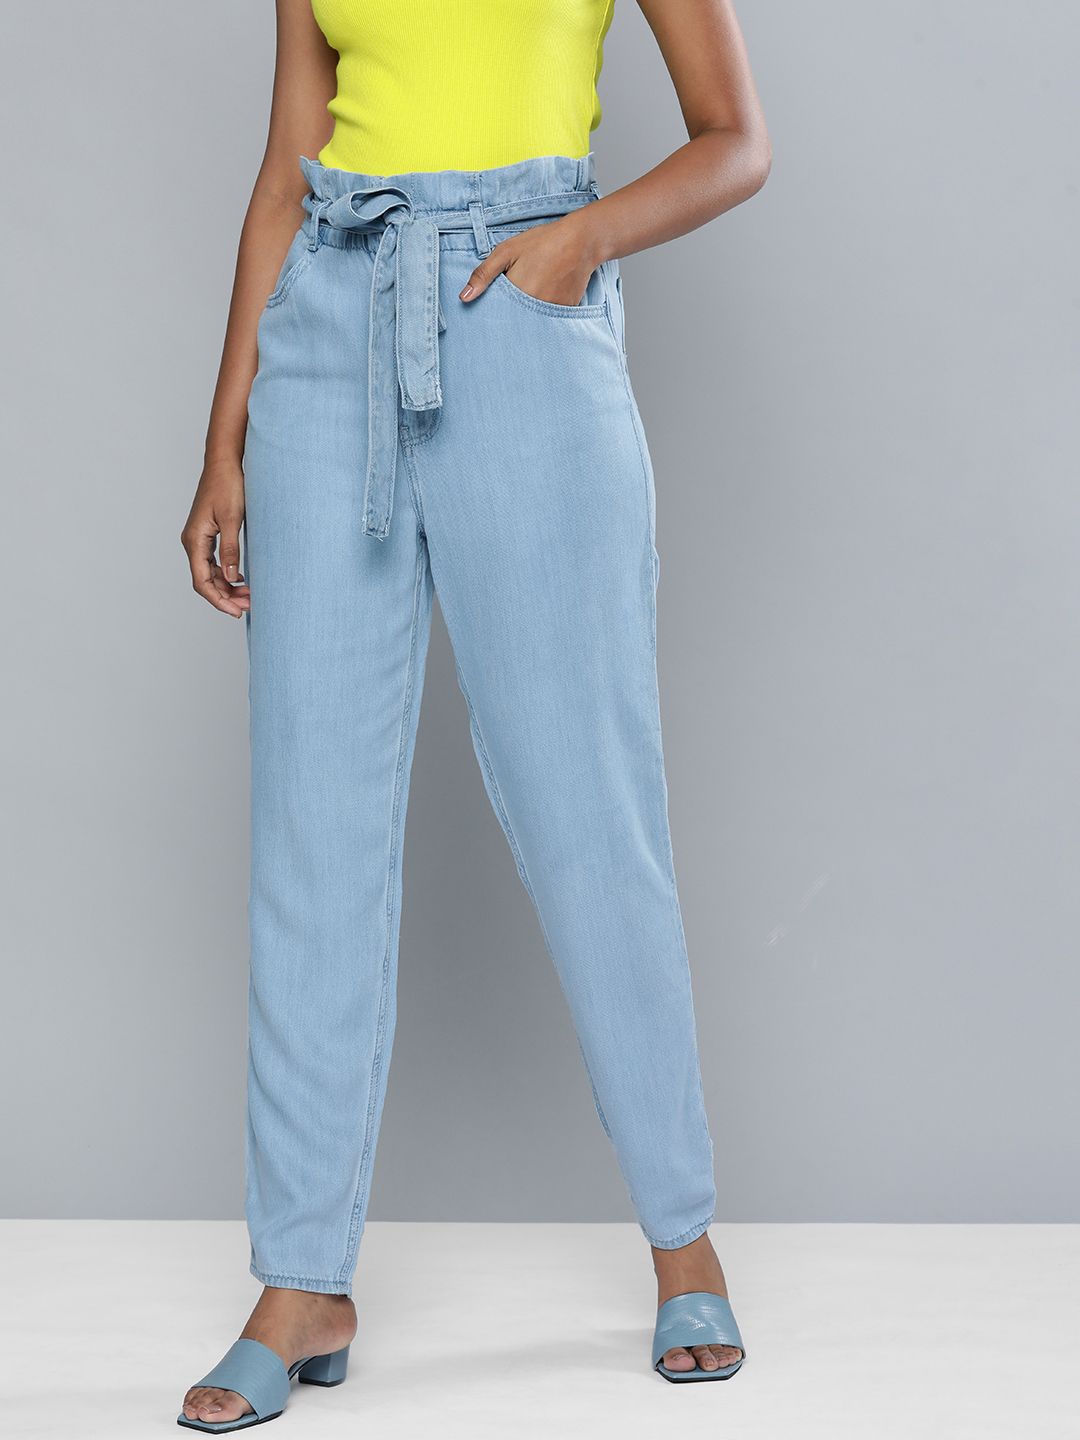 Levis X Deepika Padukone Women Light Blue Tapered Fit Mid-Rise Jeans With A Belt Price in India